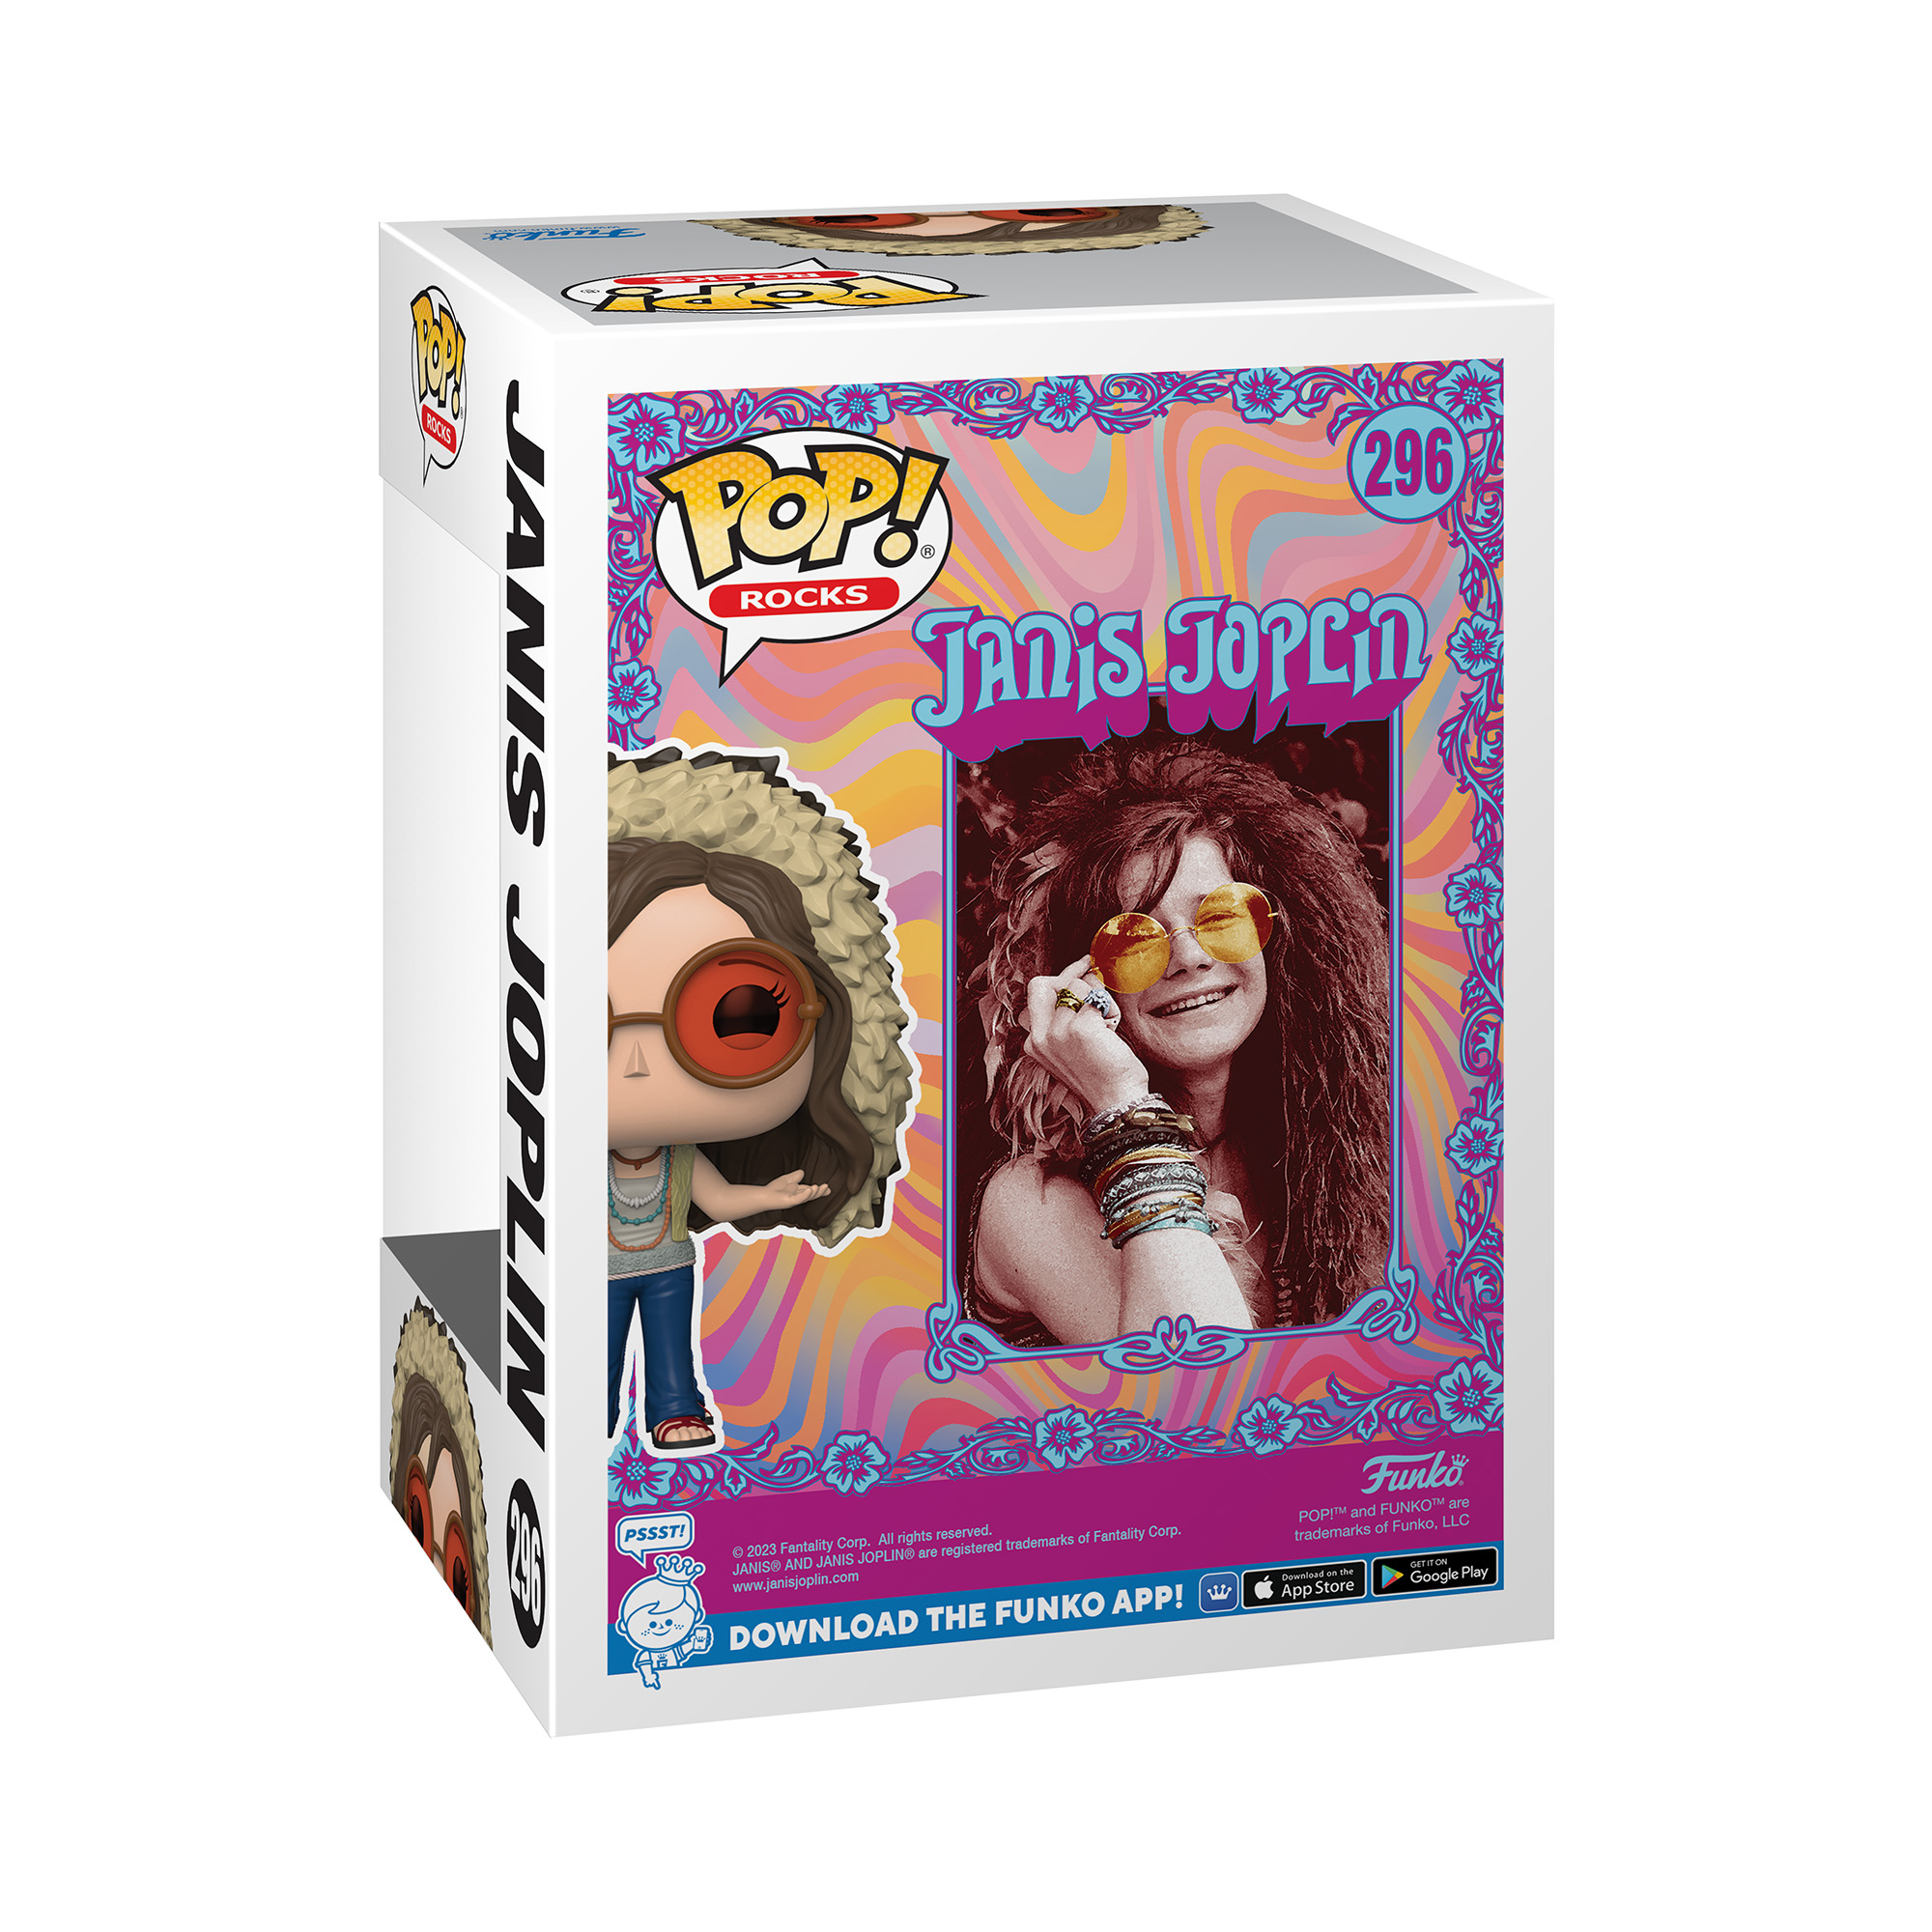 Pop! Janis Joplin Package Design on the Back of the Box